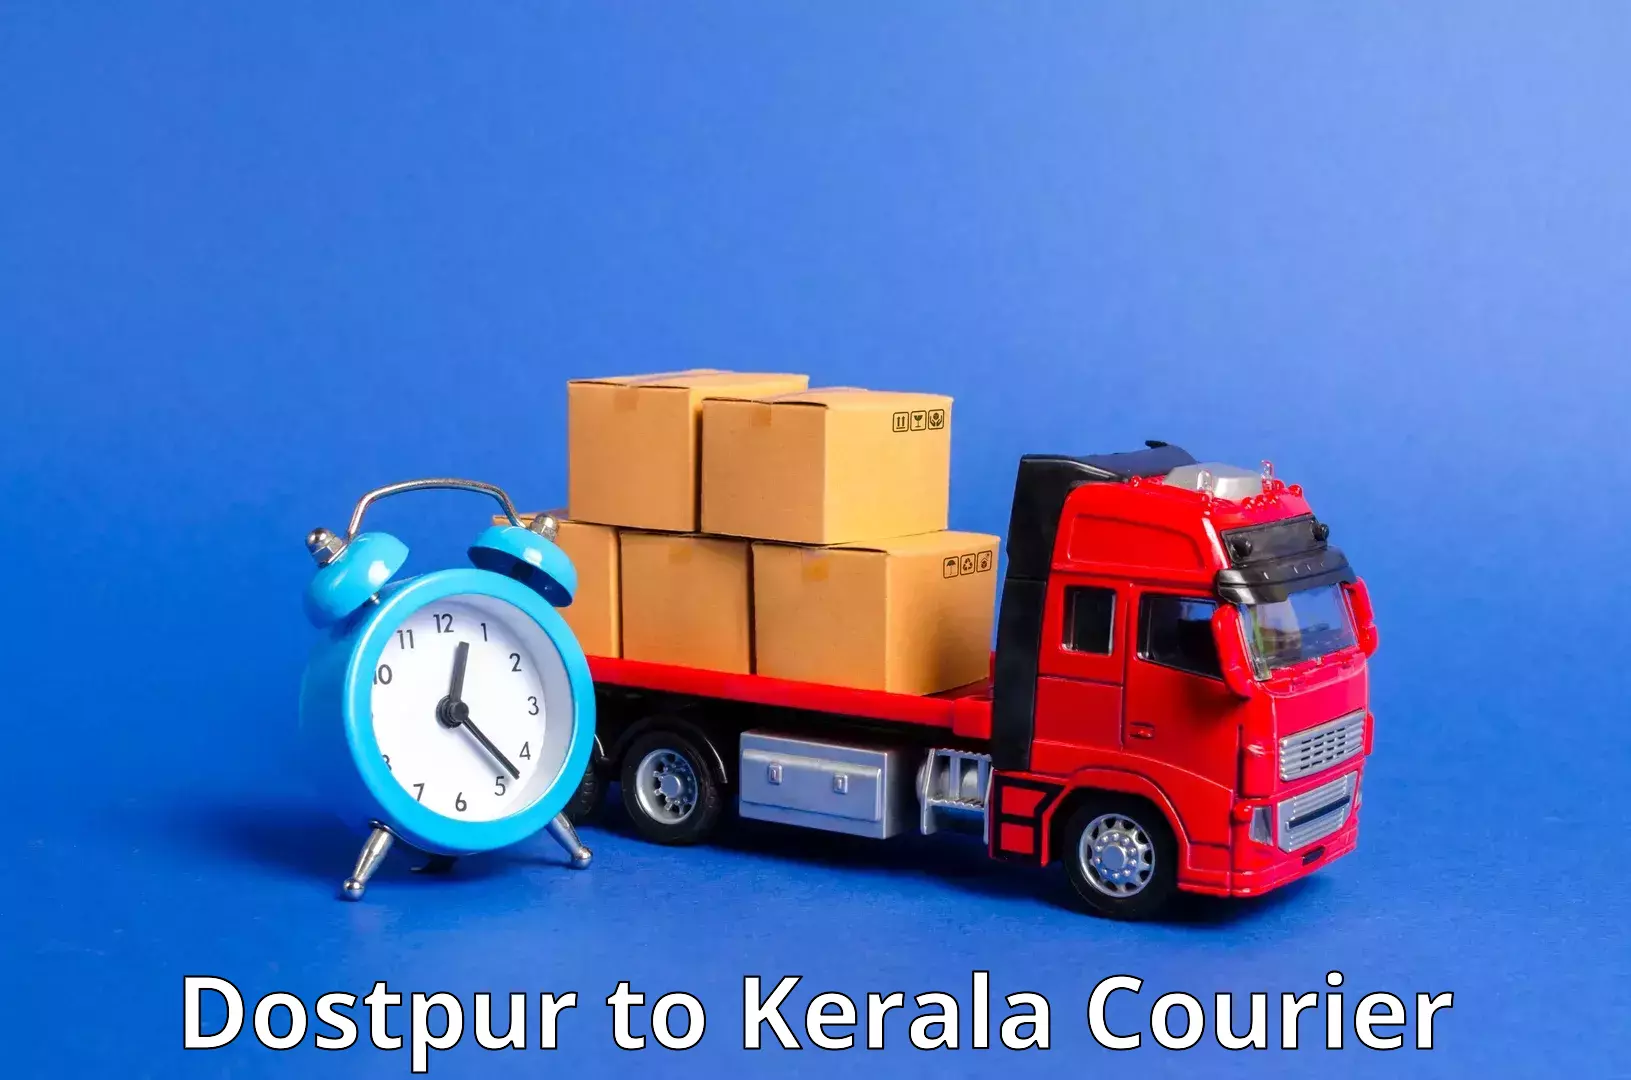 Express delivery solutions Dostpur to Kodungallur